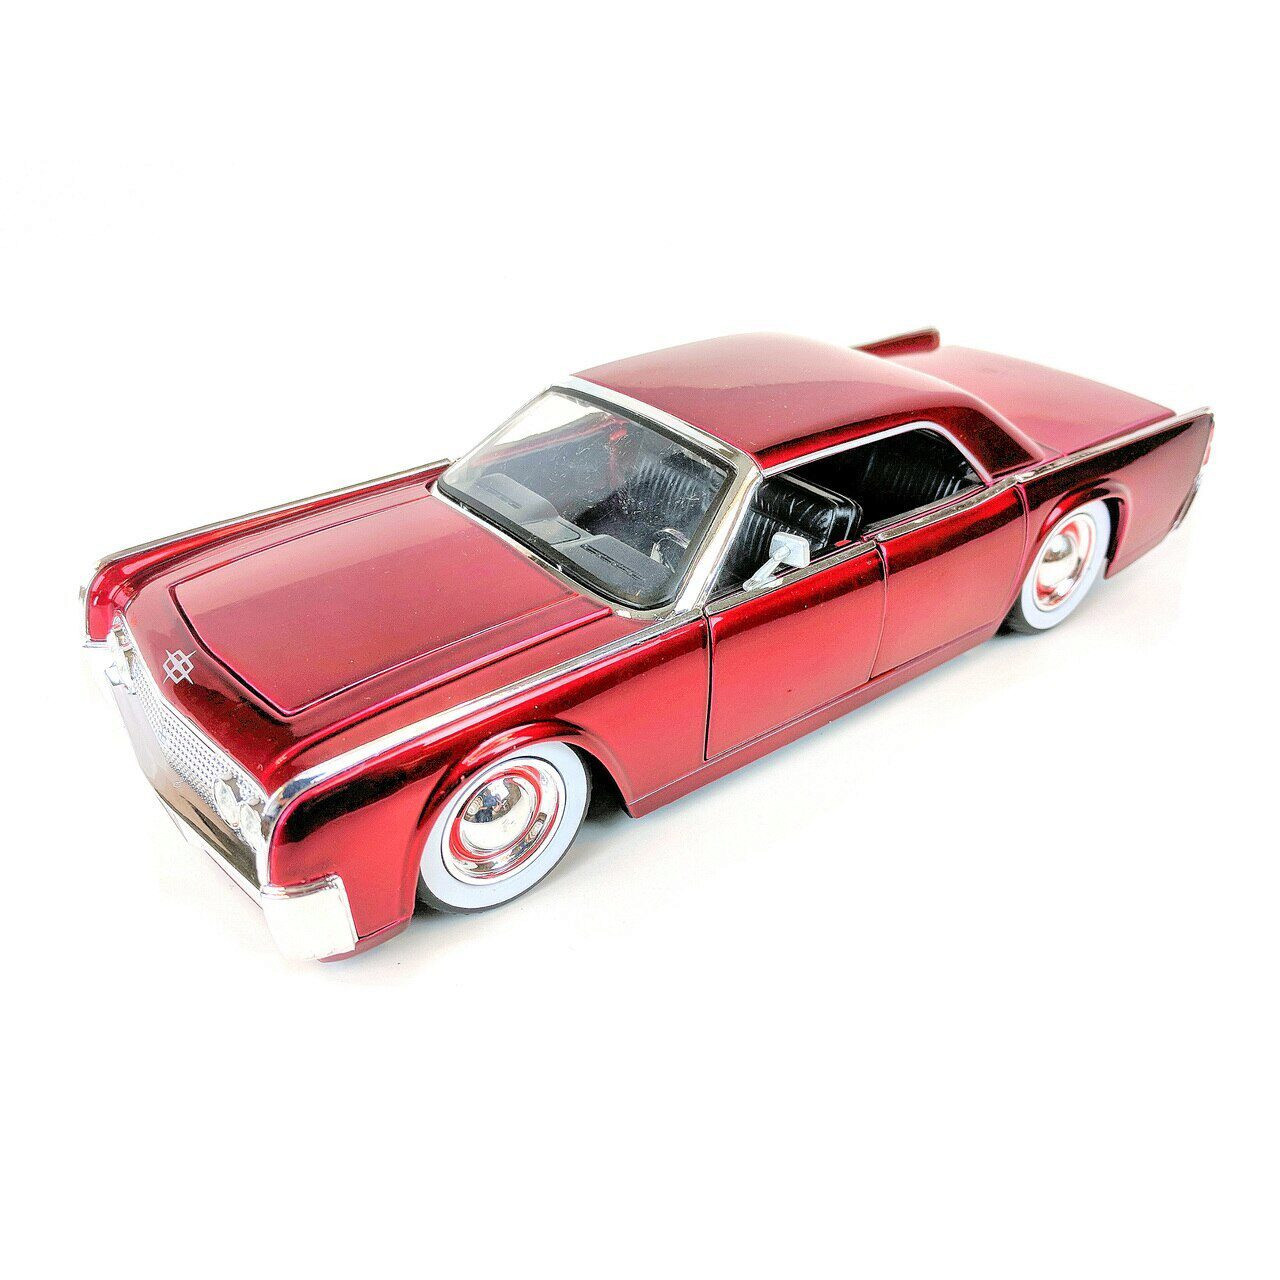 Jada 1/24 Big Time Kustoms 1963 Lincoln Continental Red 1:24 Scale Diecast  Replica Model by Jada Toys